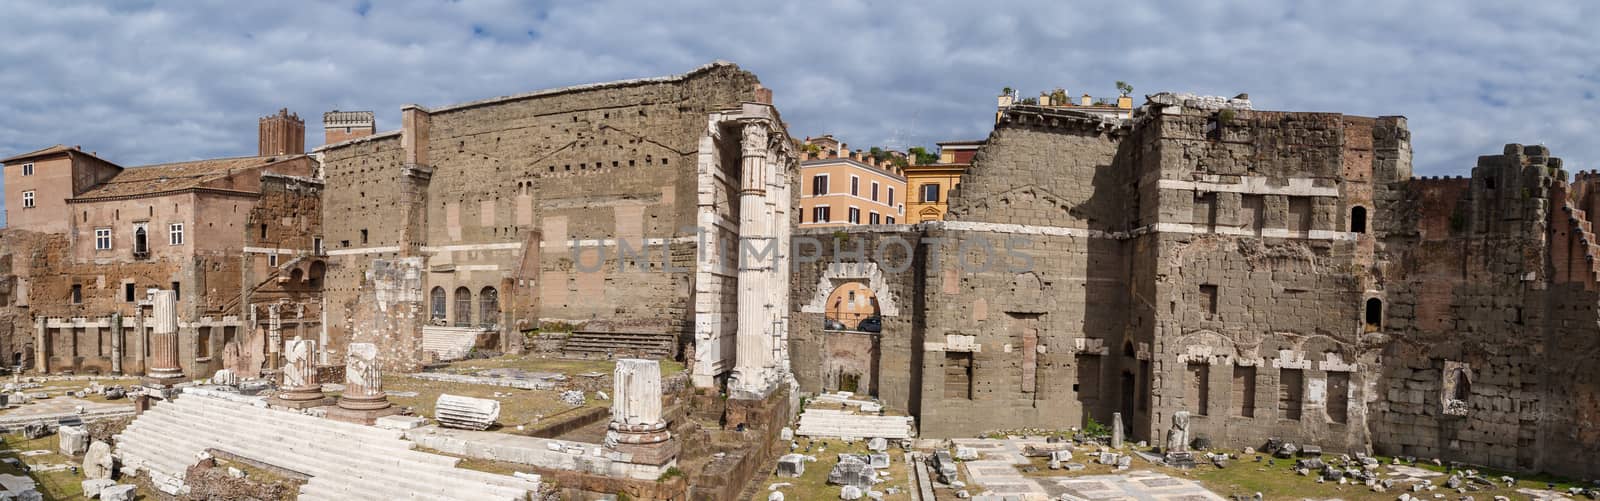 View of an ancient Roman Forum with columns and ruins around in Rome, with tourists around, on cloudy sky background.